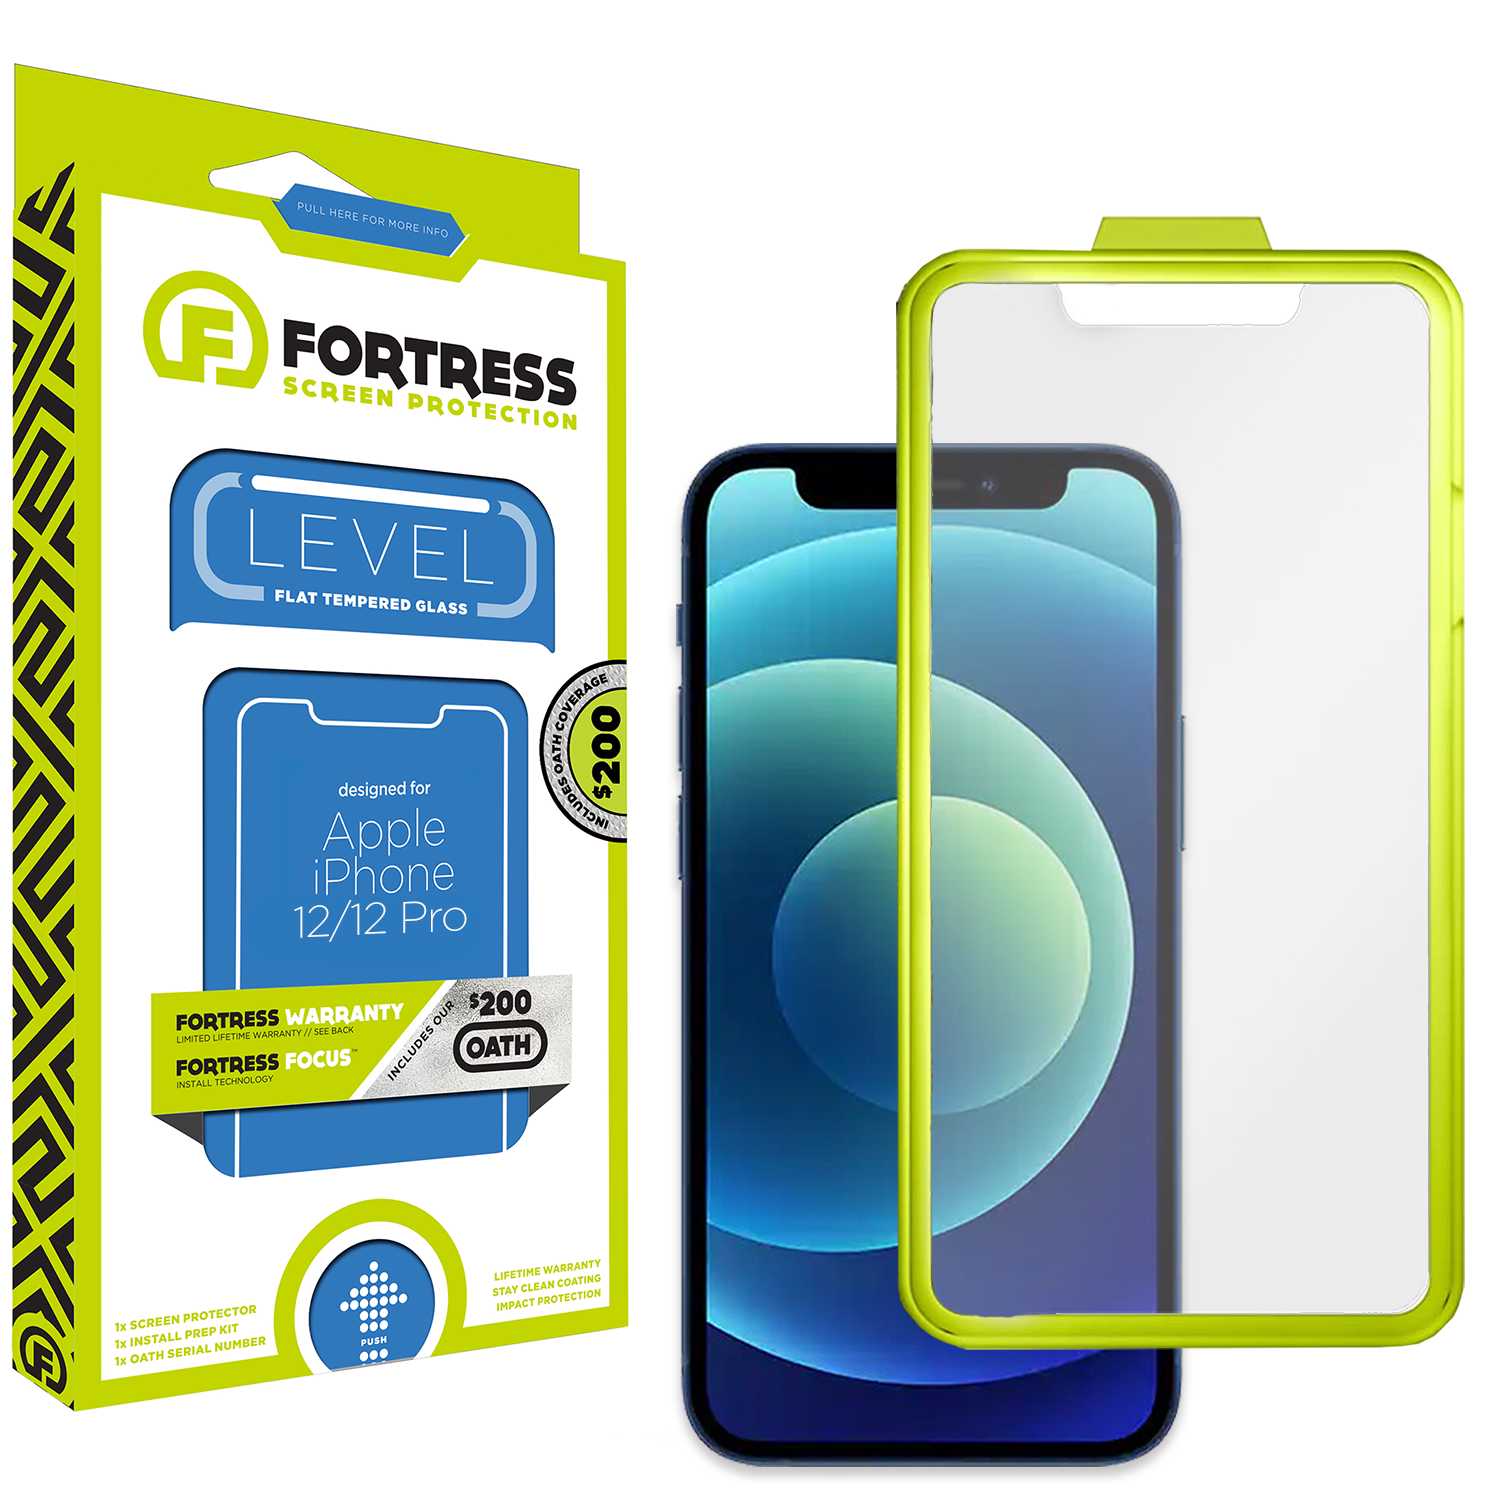 Fortress iPhone 12 Pro Screen Protector $200CoverageInstallTool Scooch Screen Protector